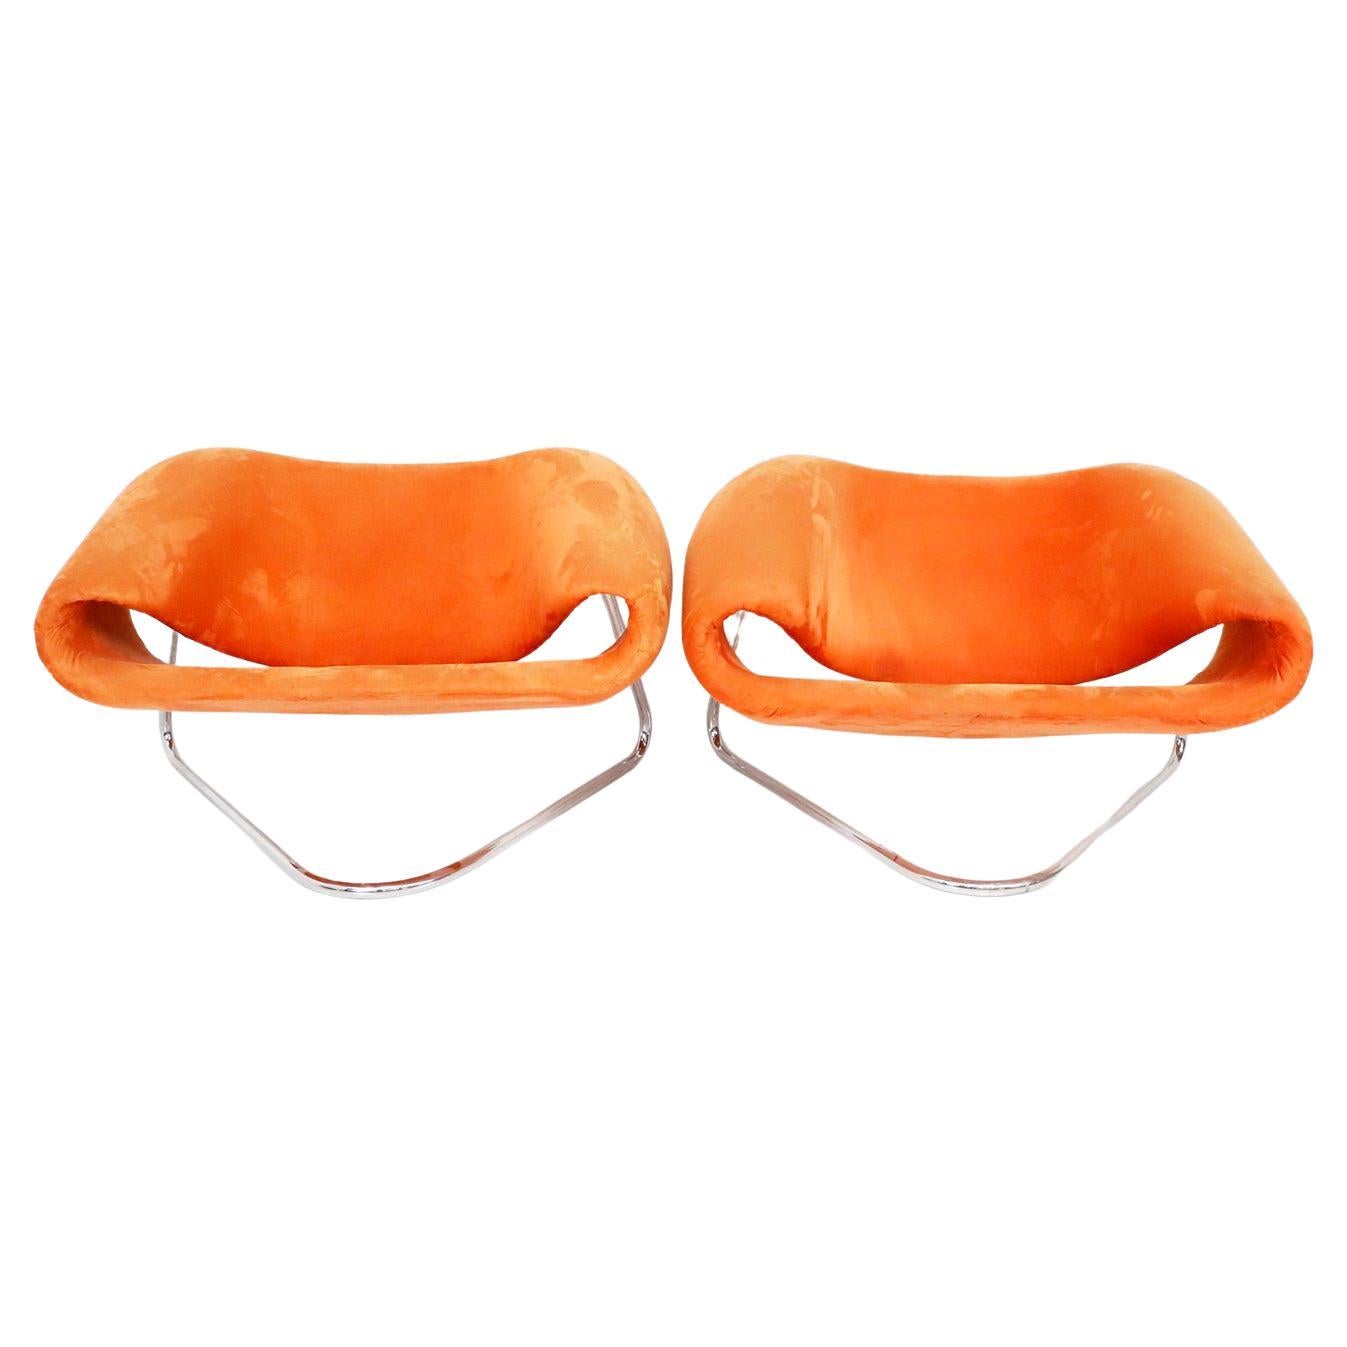 Pair of Ribbon Chairs Attributed to Cesare Leonardi & Franca Stagi